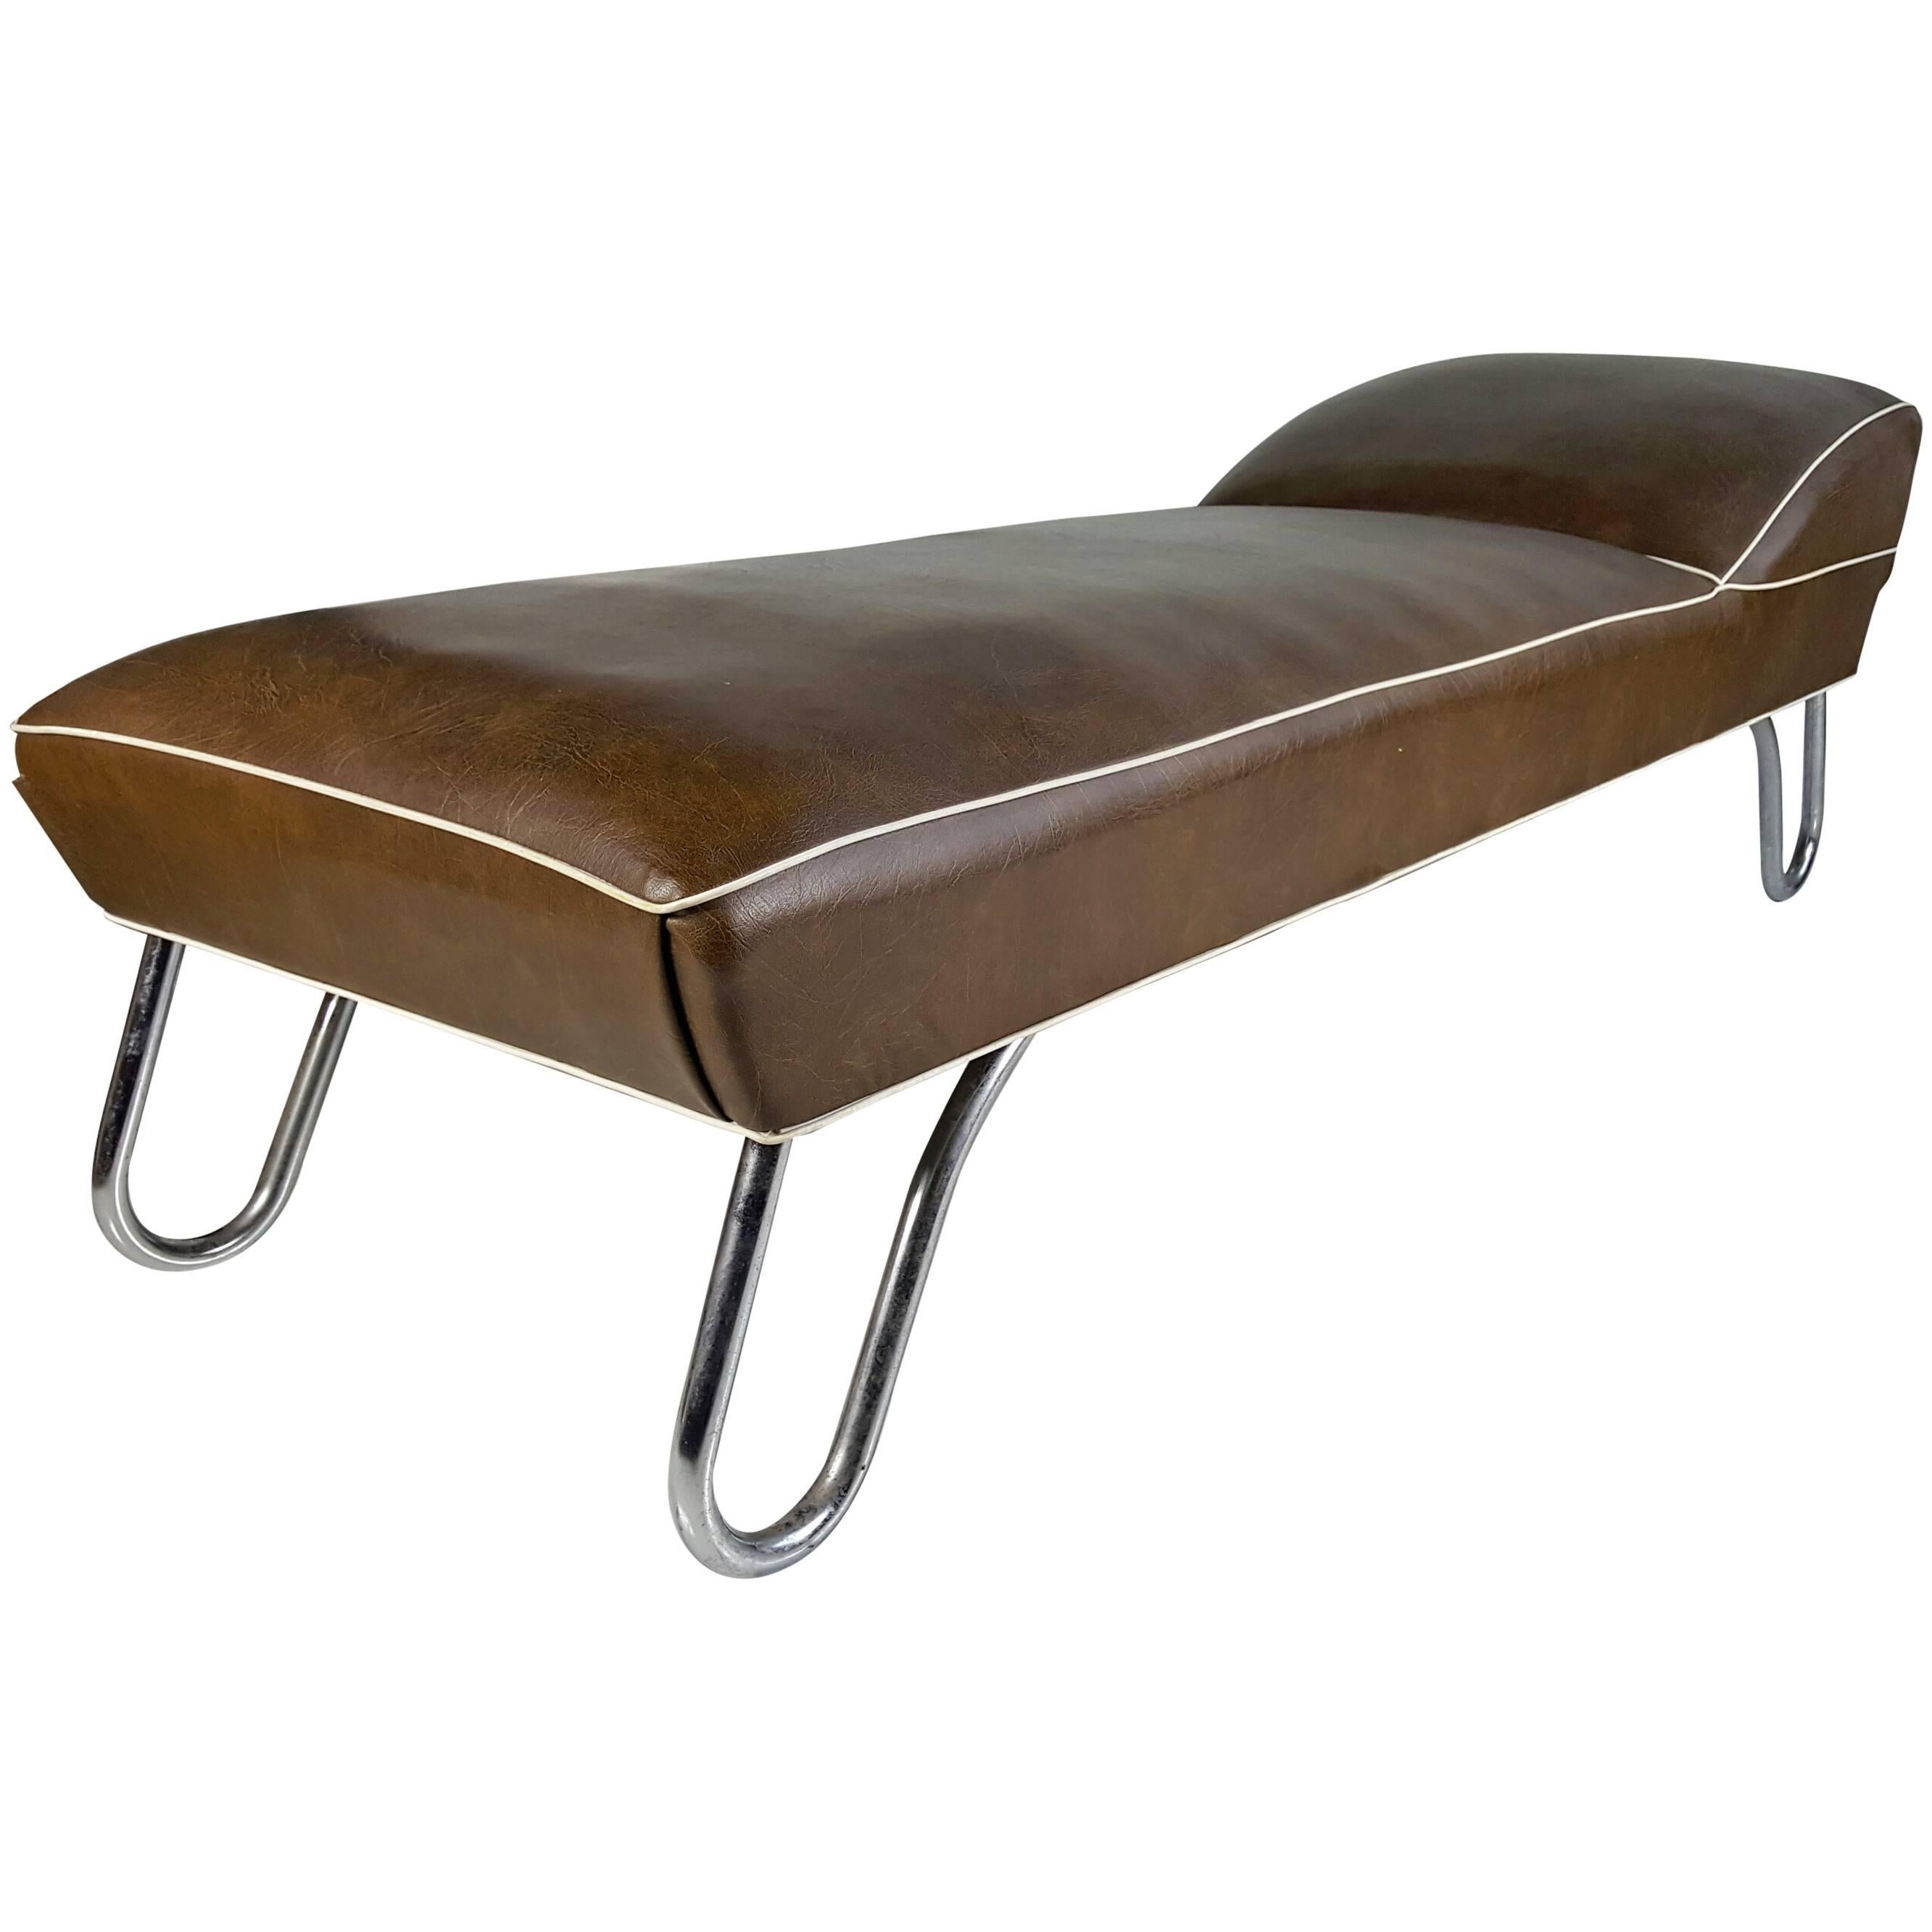 KEM Weber Daybed or Chaise Longue, Art Deco